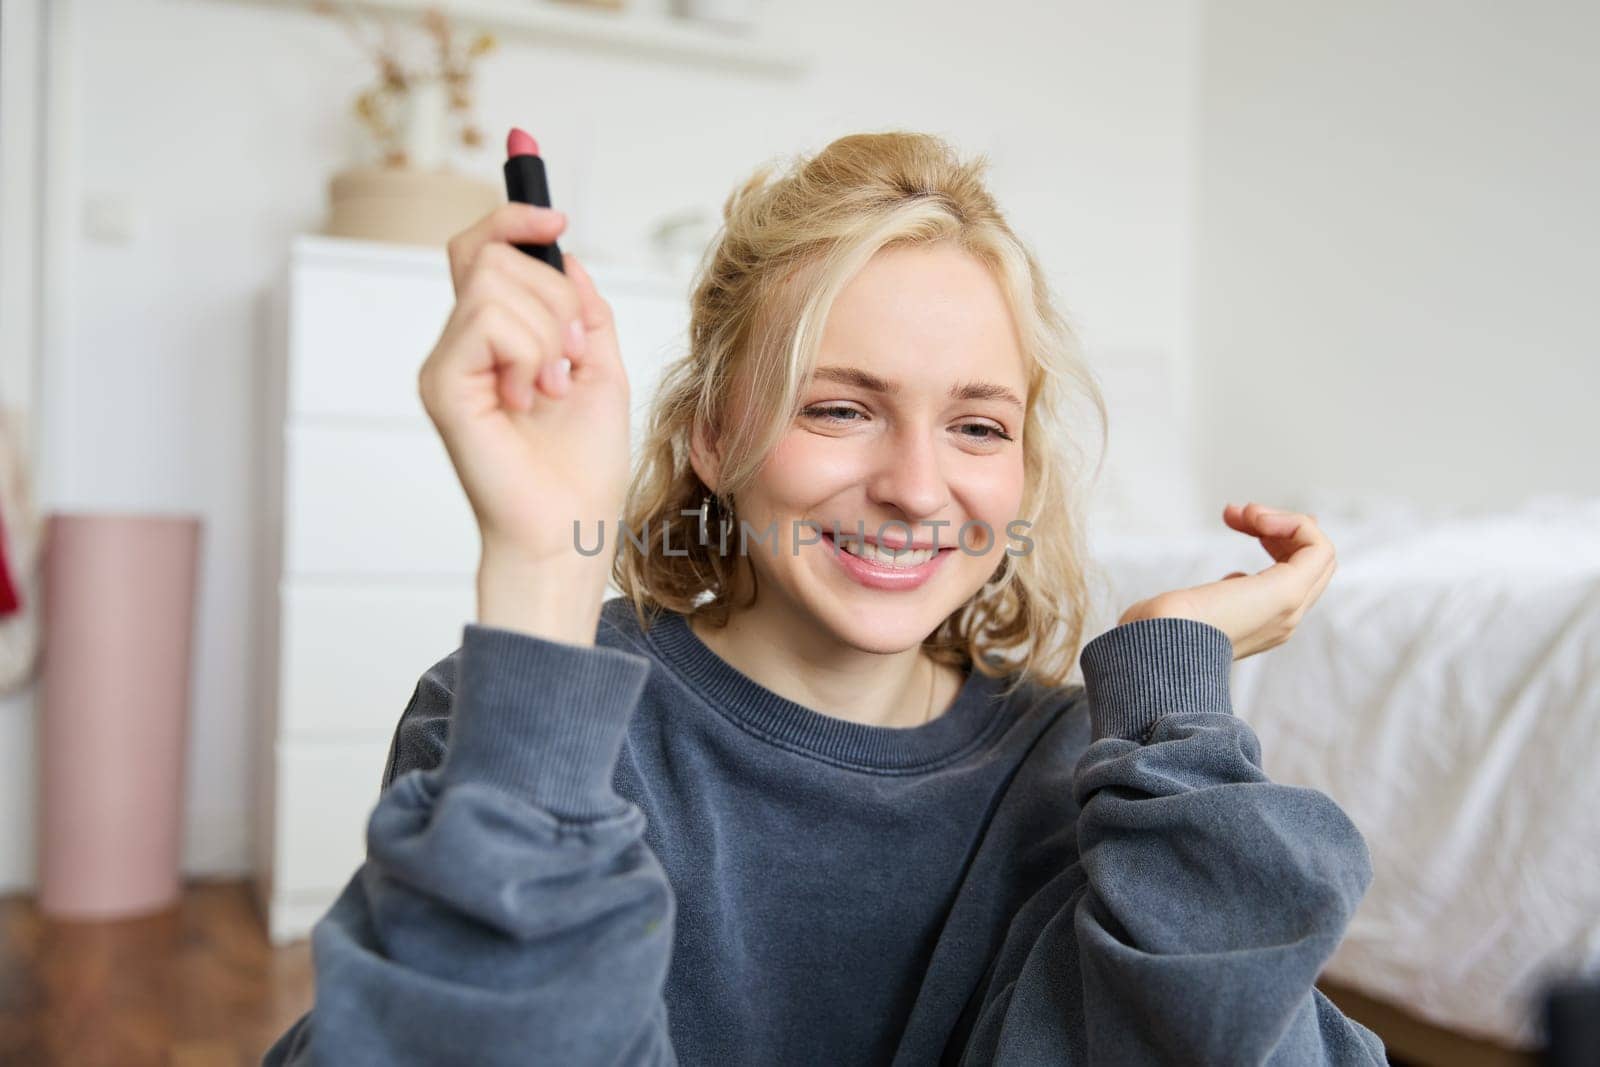 Portrait of young social media influencer, woman recording a video with beauty products, showing her makeup on camera, holding lipstick and smiling, sitting on floor.